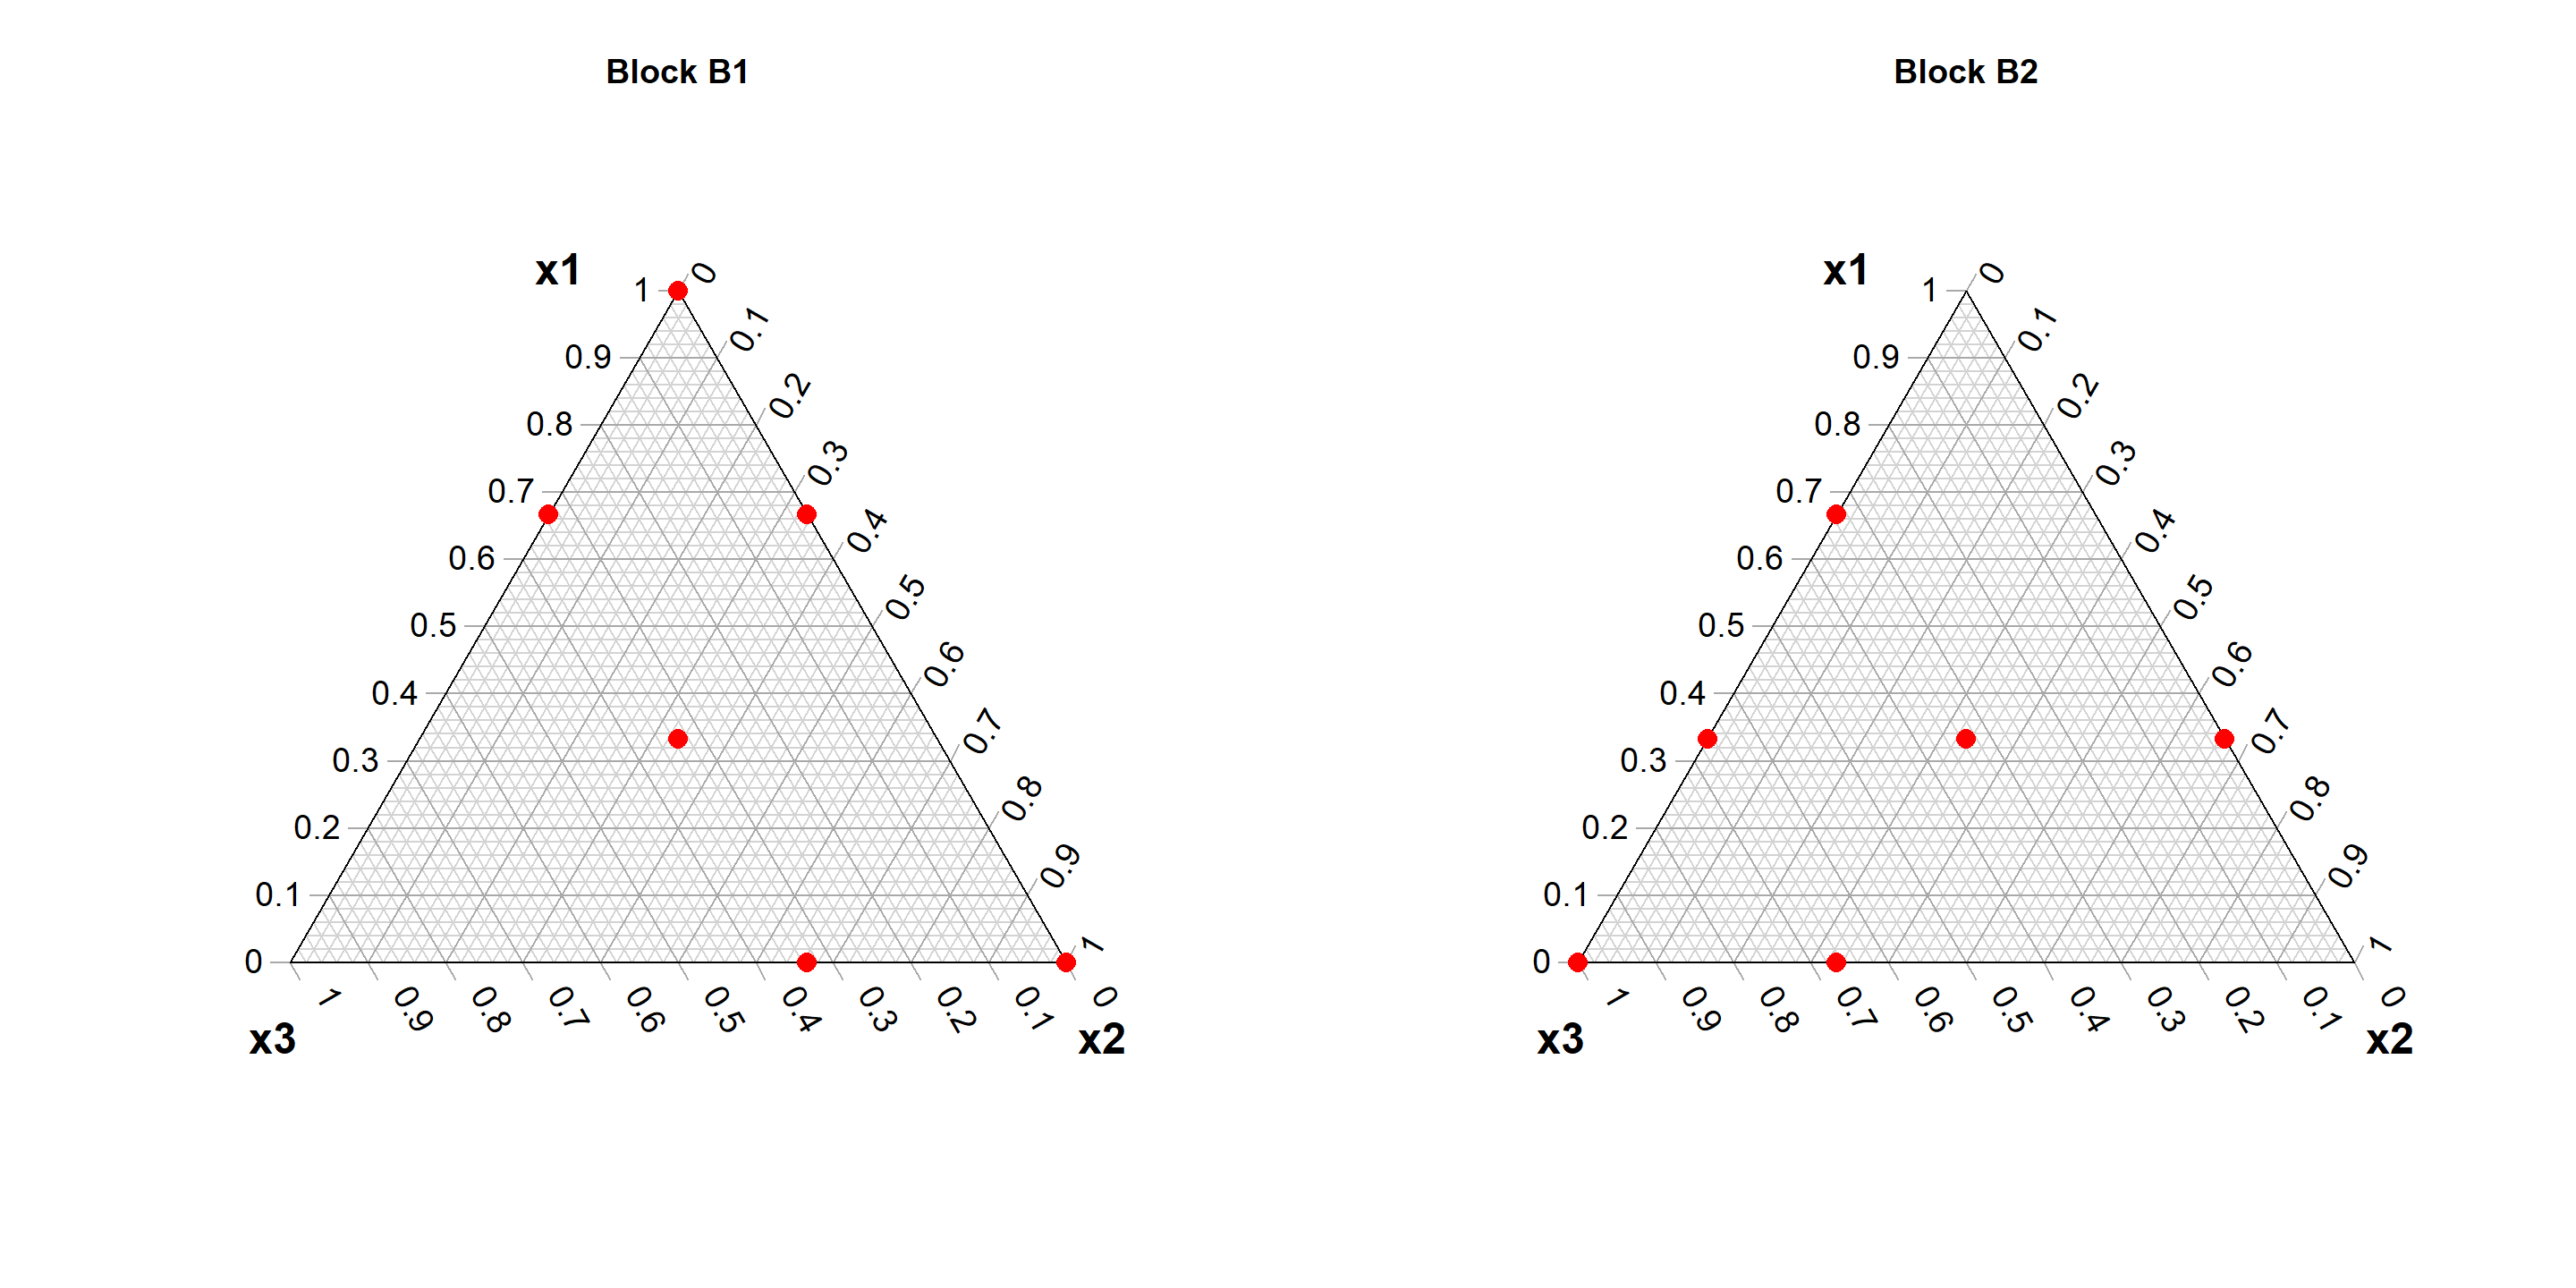 Full cubic mixture design in two blocks B1 (left panel) and B2 (right panel)